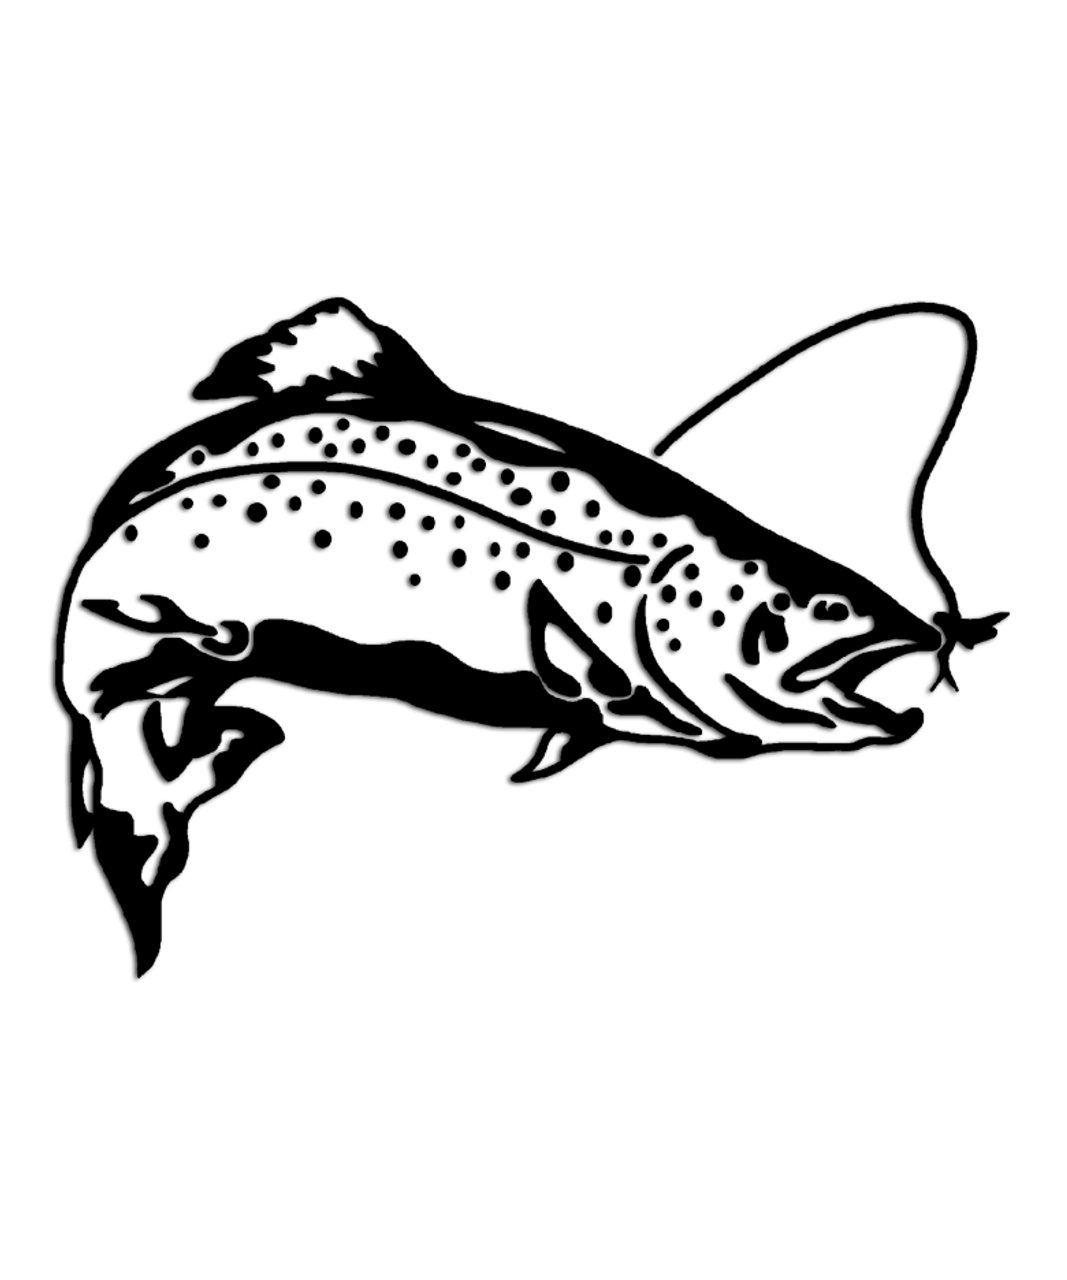 Rainbow Trout Fly Fishing Sticker - Aftershock Decals